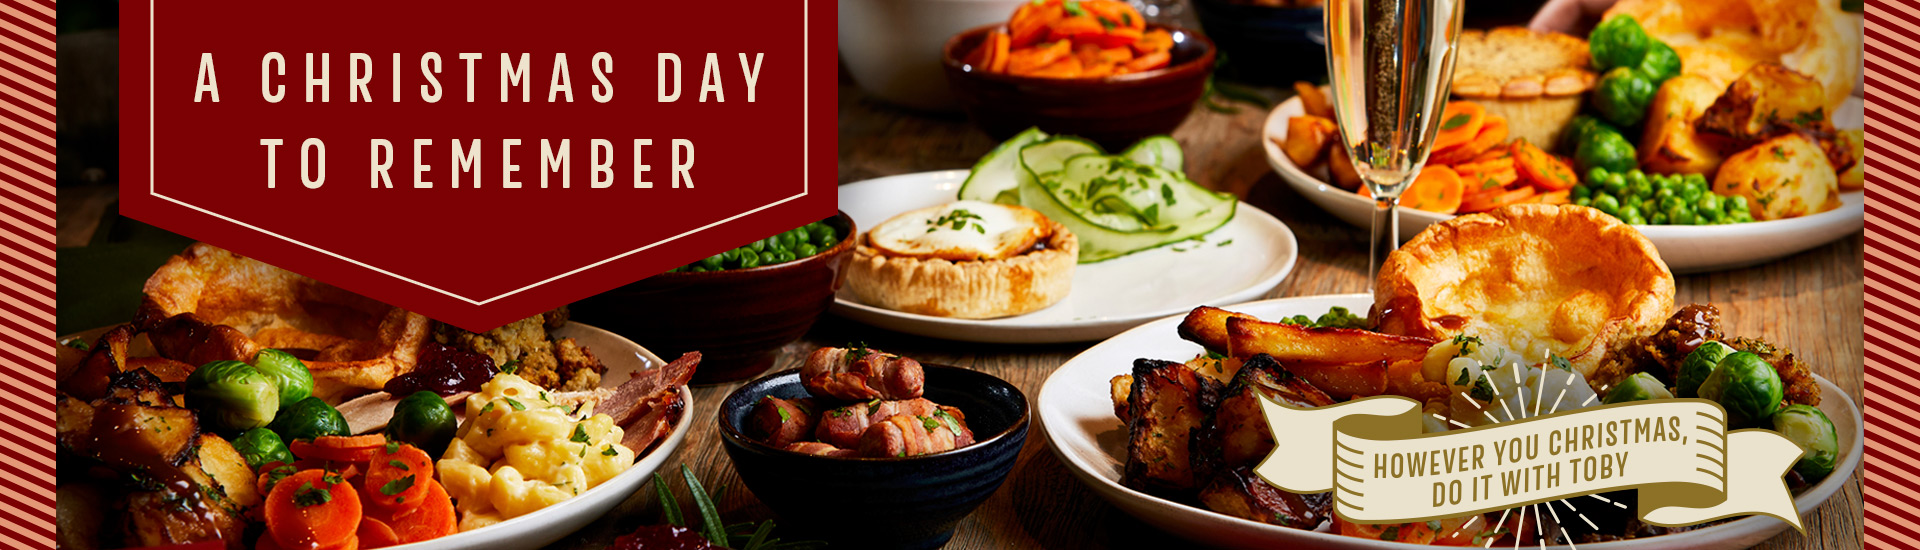 Christmas Day menu at Toby Carvery Blackpool